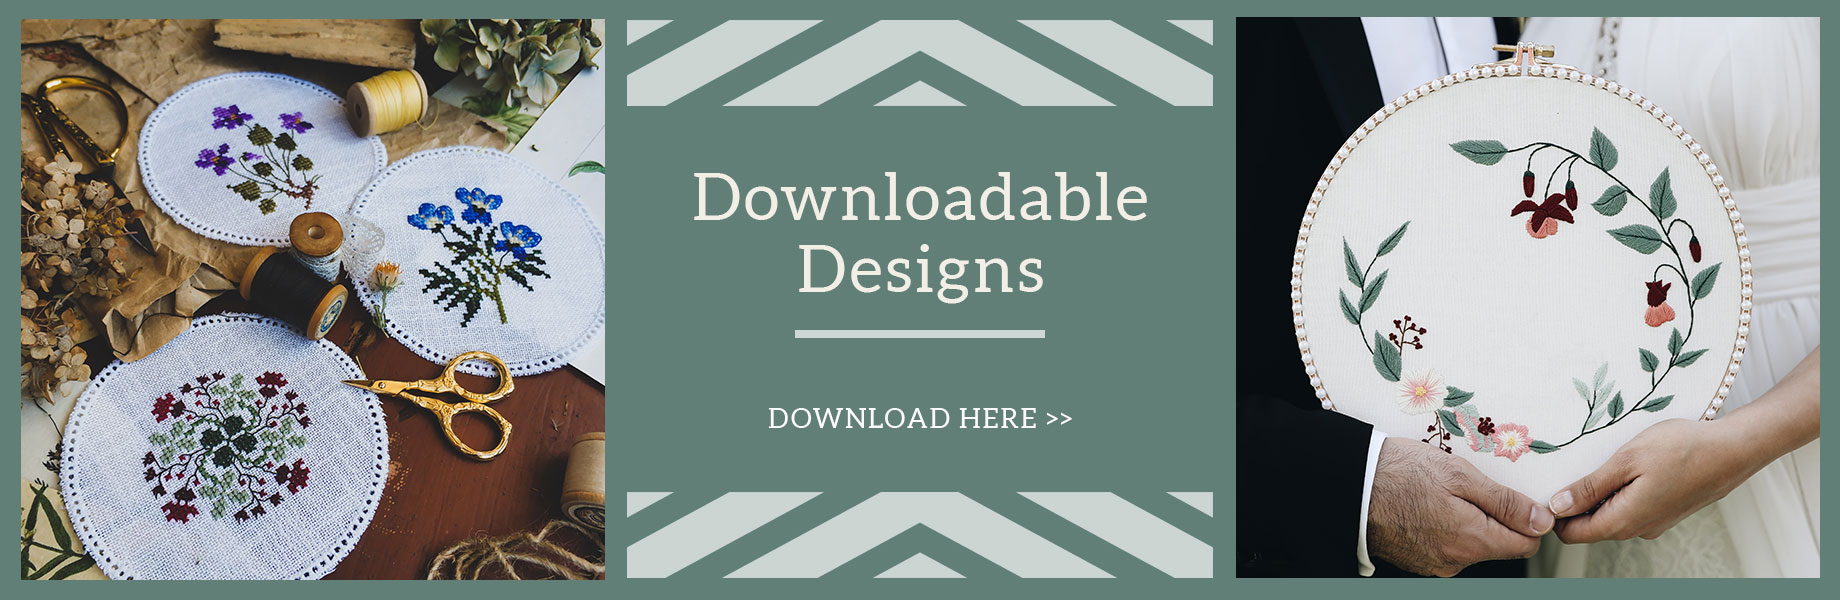 gsd-downloadable-designs-embroidery-blue-banner.jpg